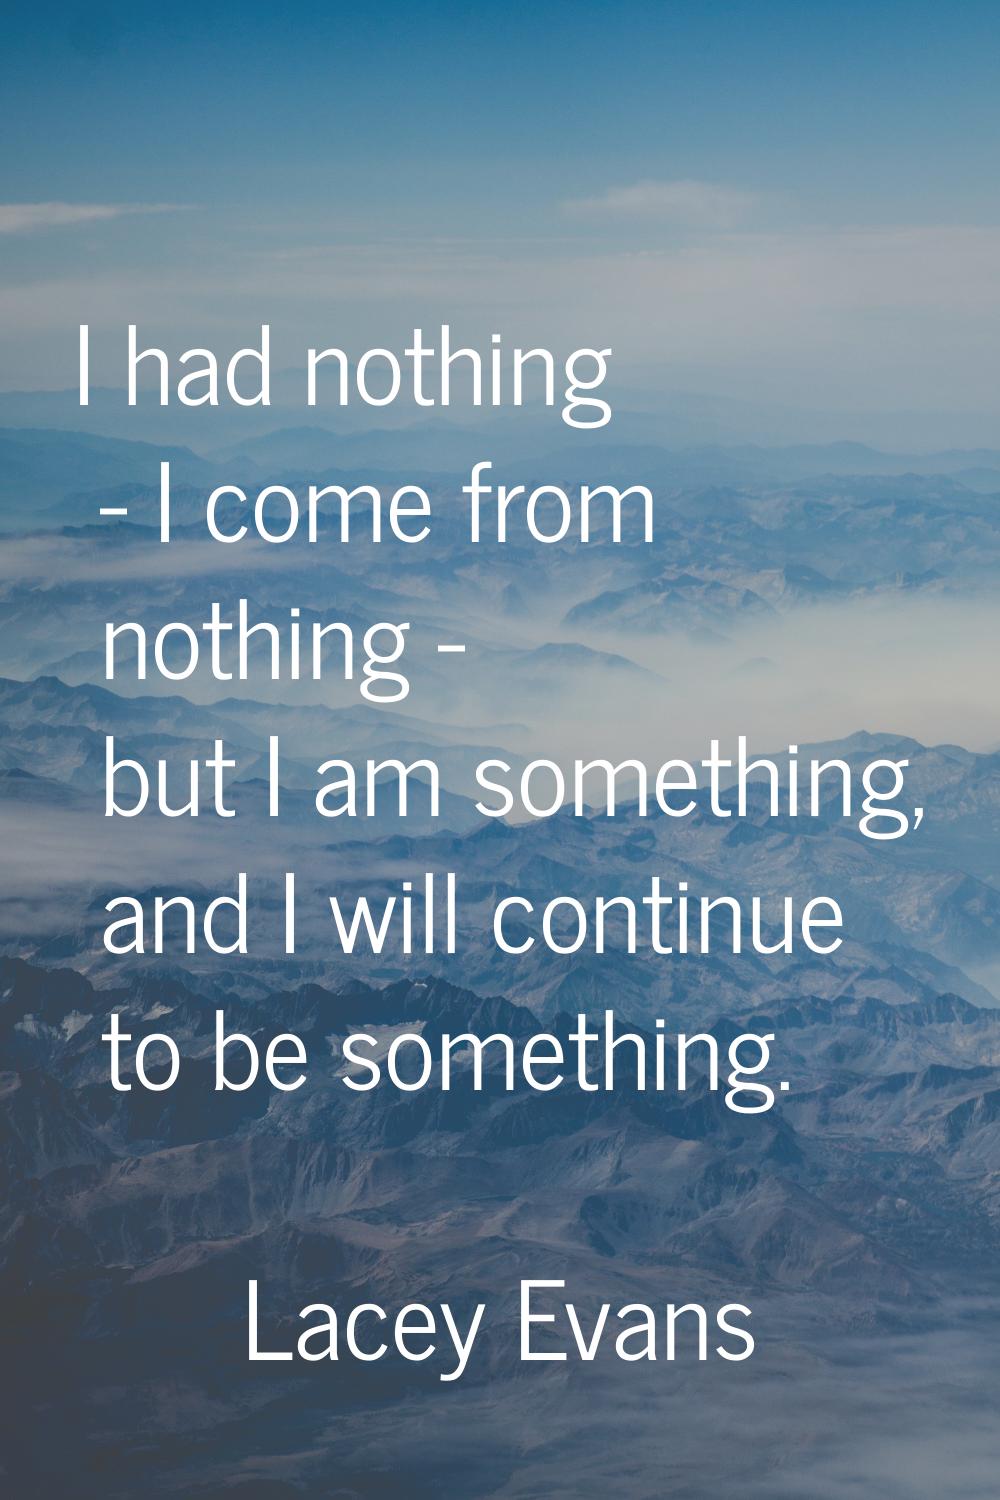 I had nothing - I come from nothing - but I am something, and I will continue to be something.